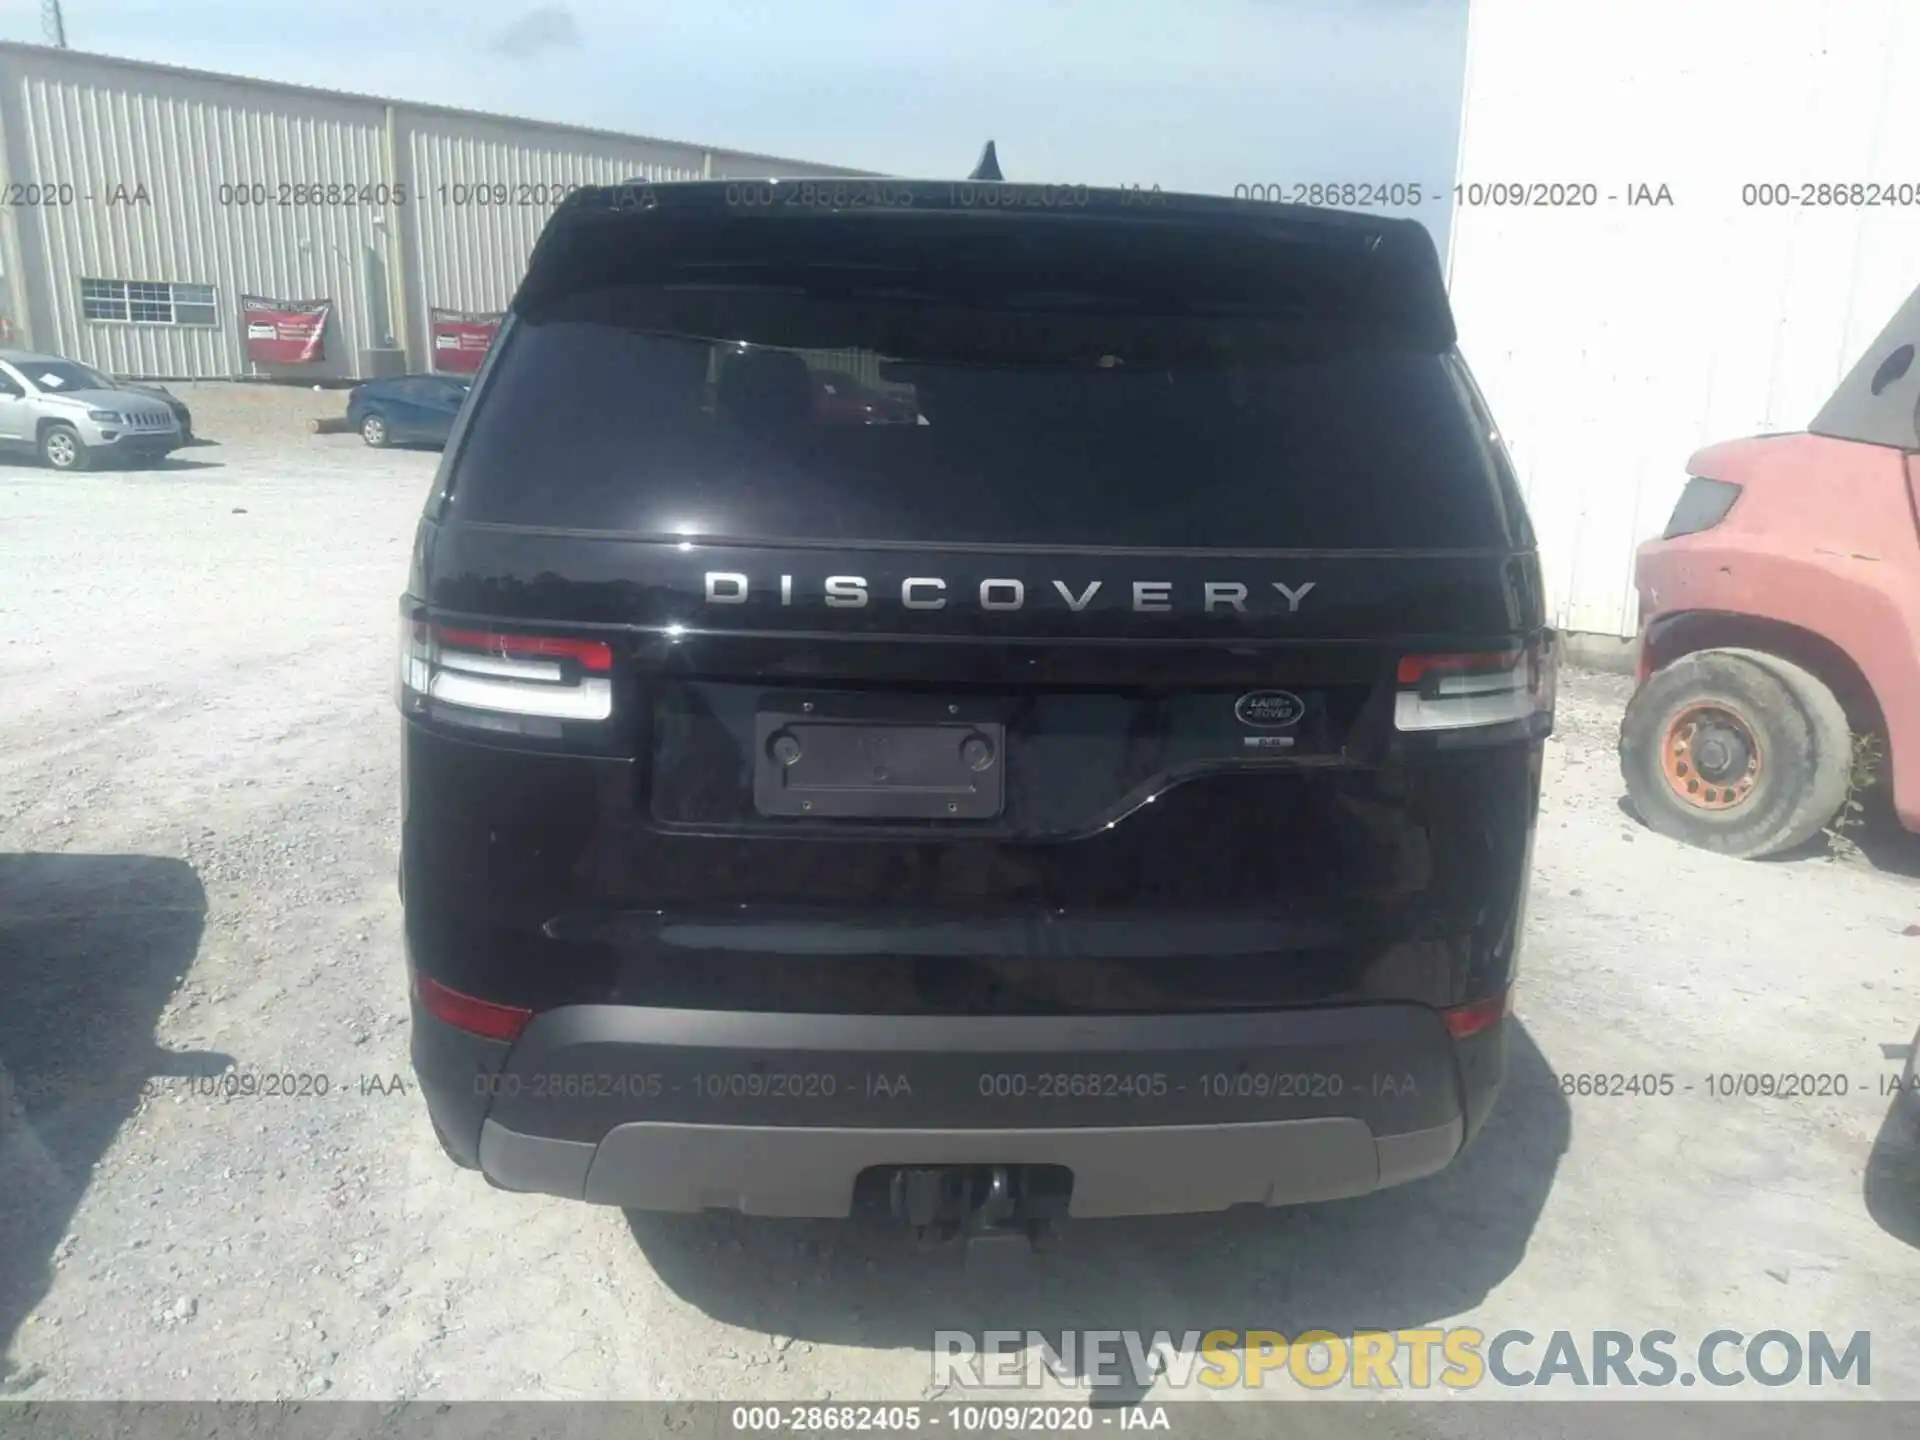 8 Photograph of a damaged car SALRG2RV1L2433289 LAND ROVER DISCOVERY 2020